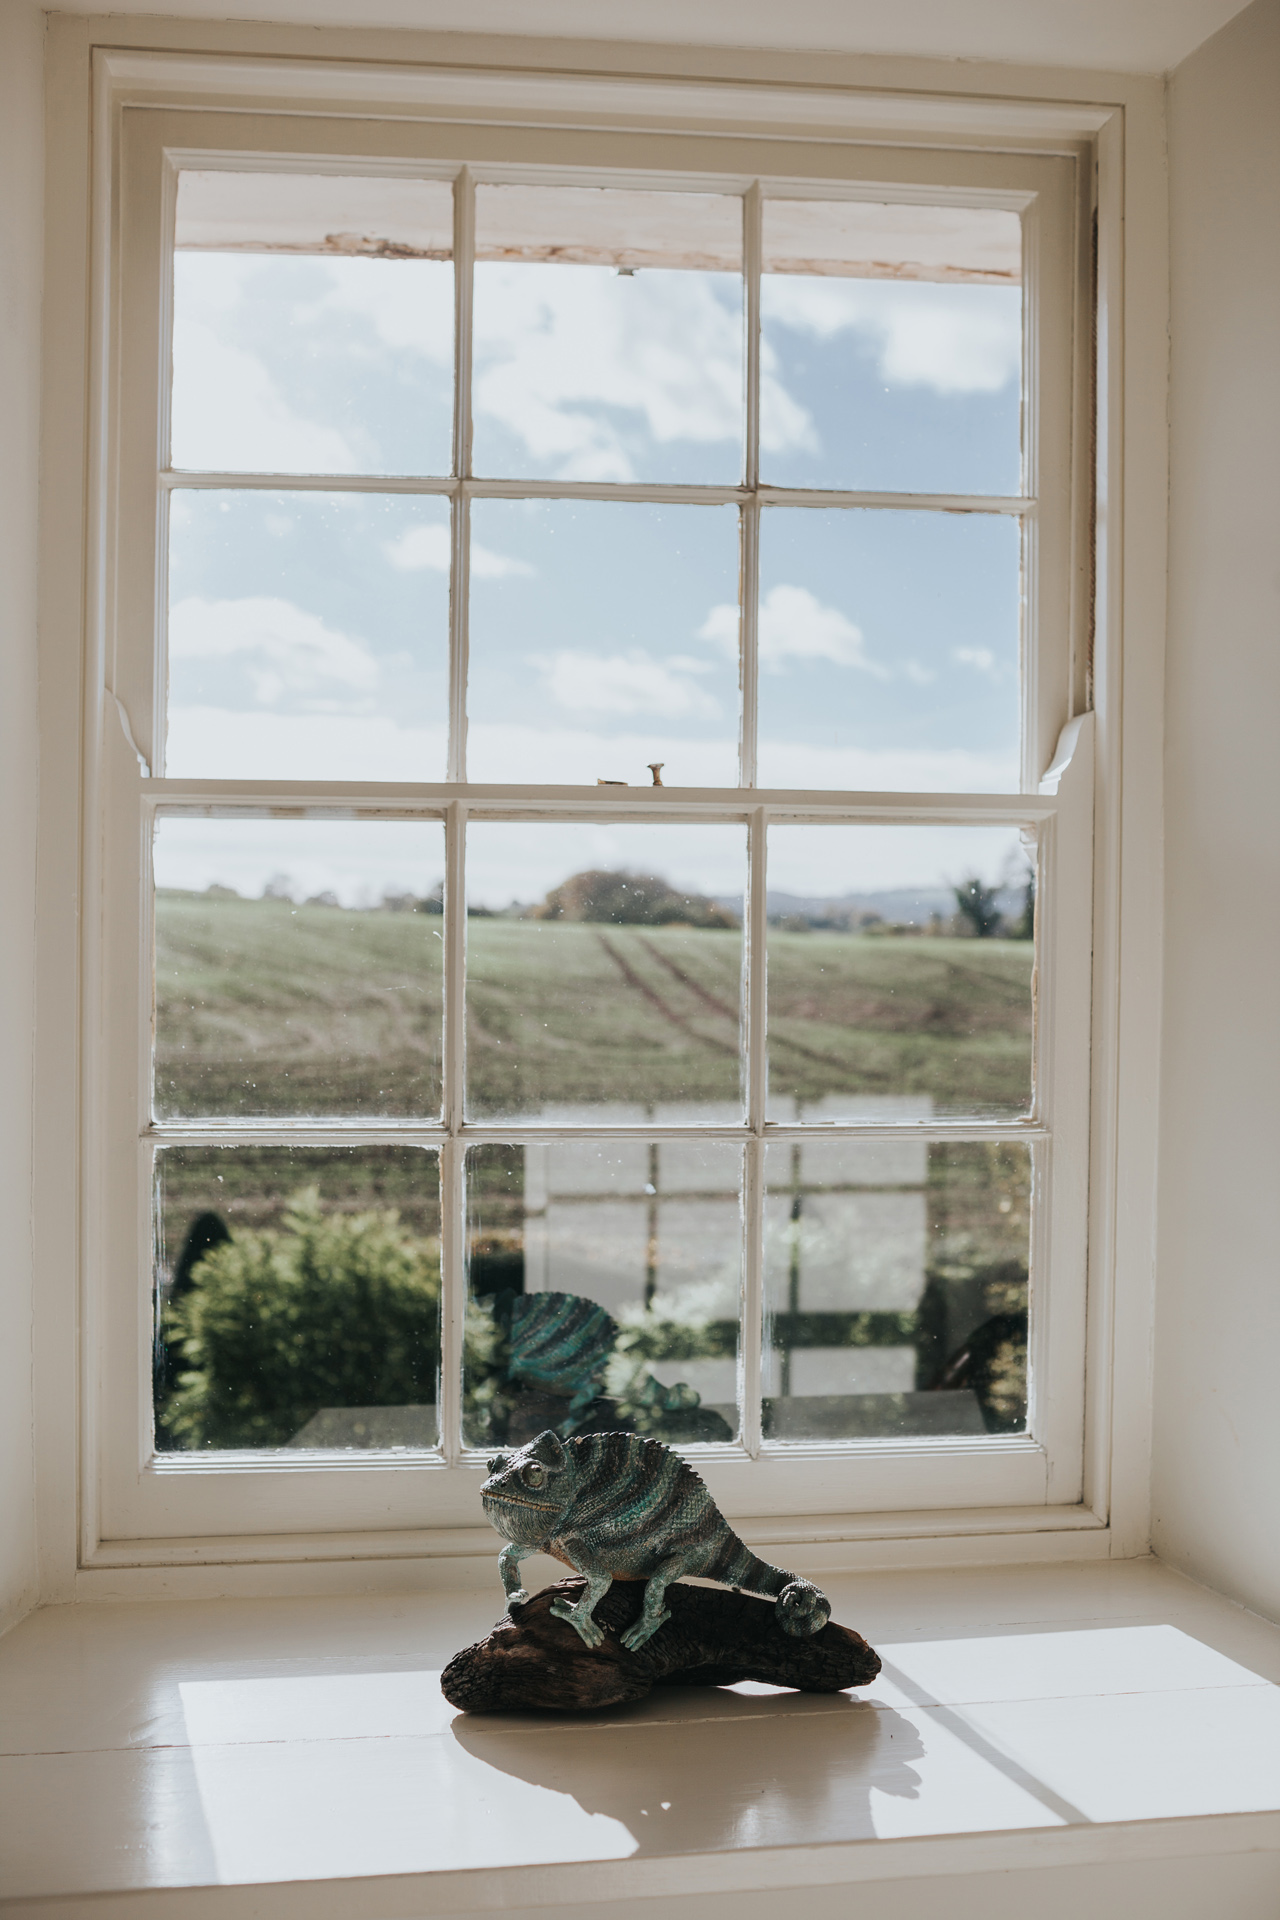 A window with a view over Callow with a Chameleon. 